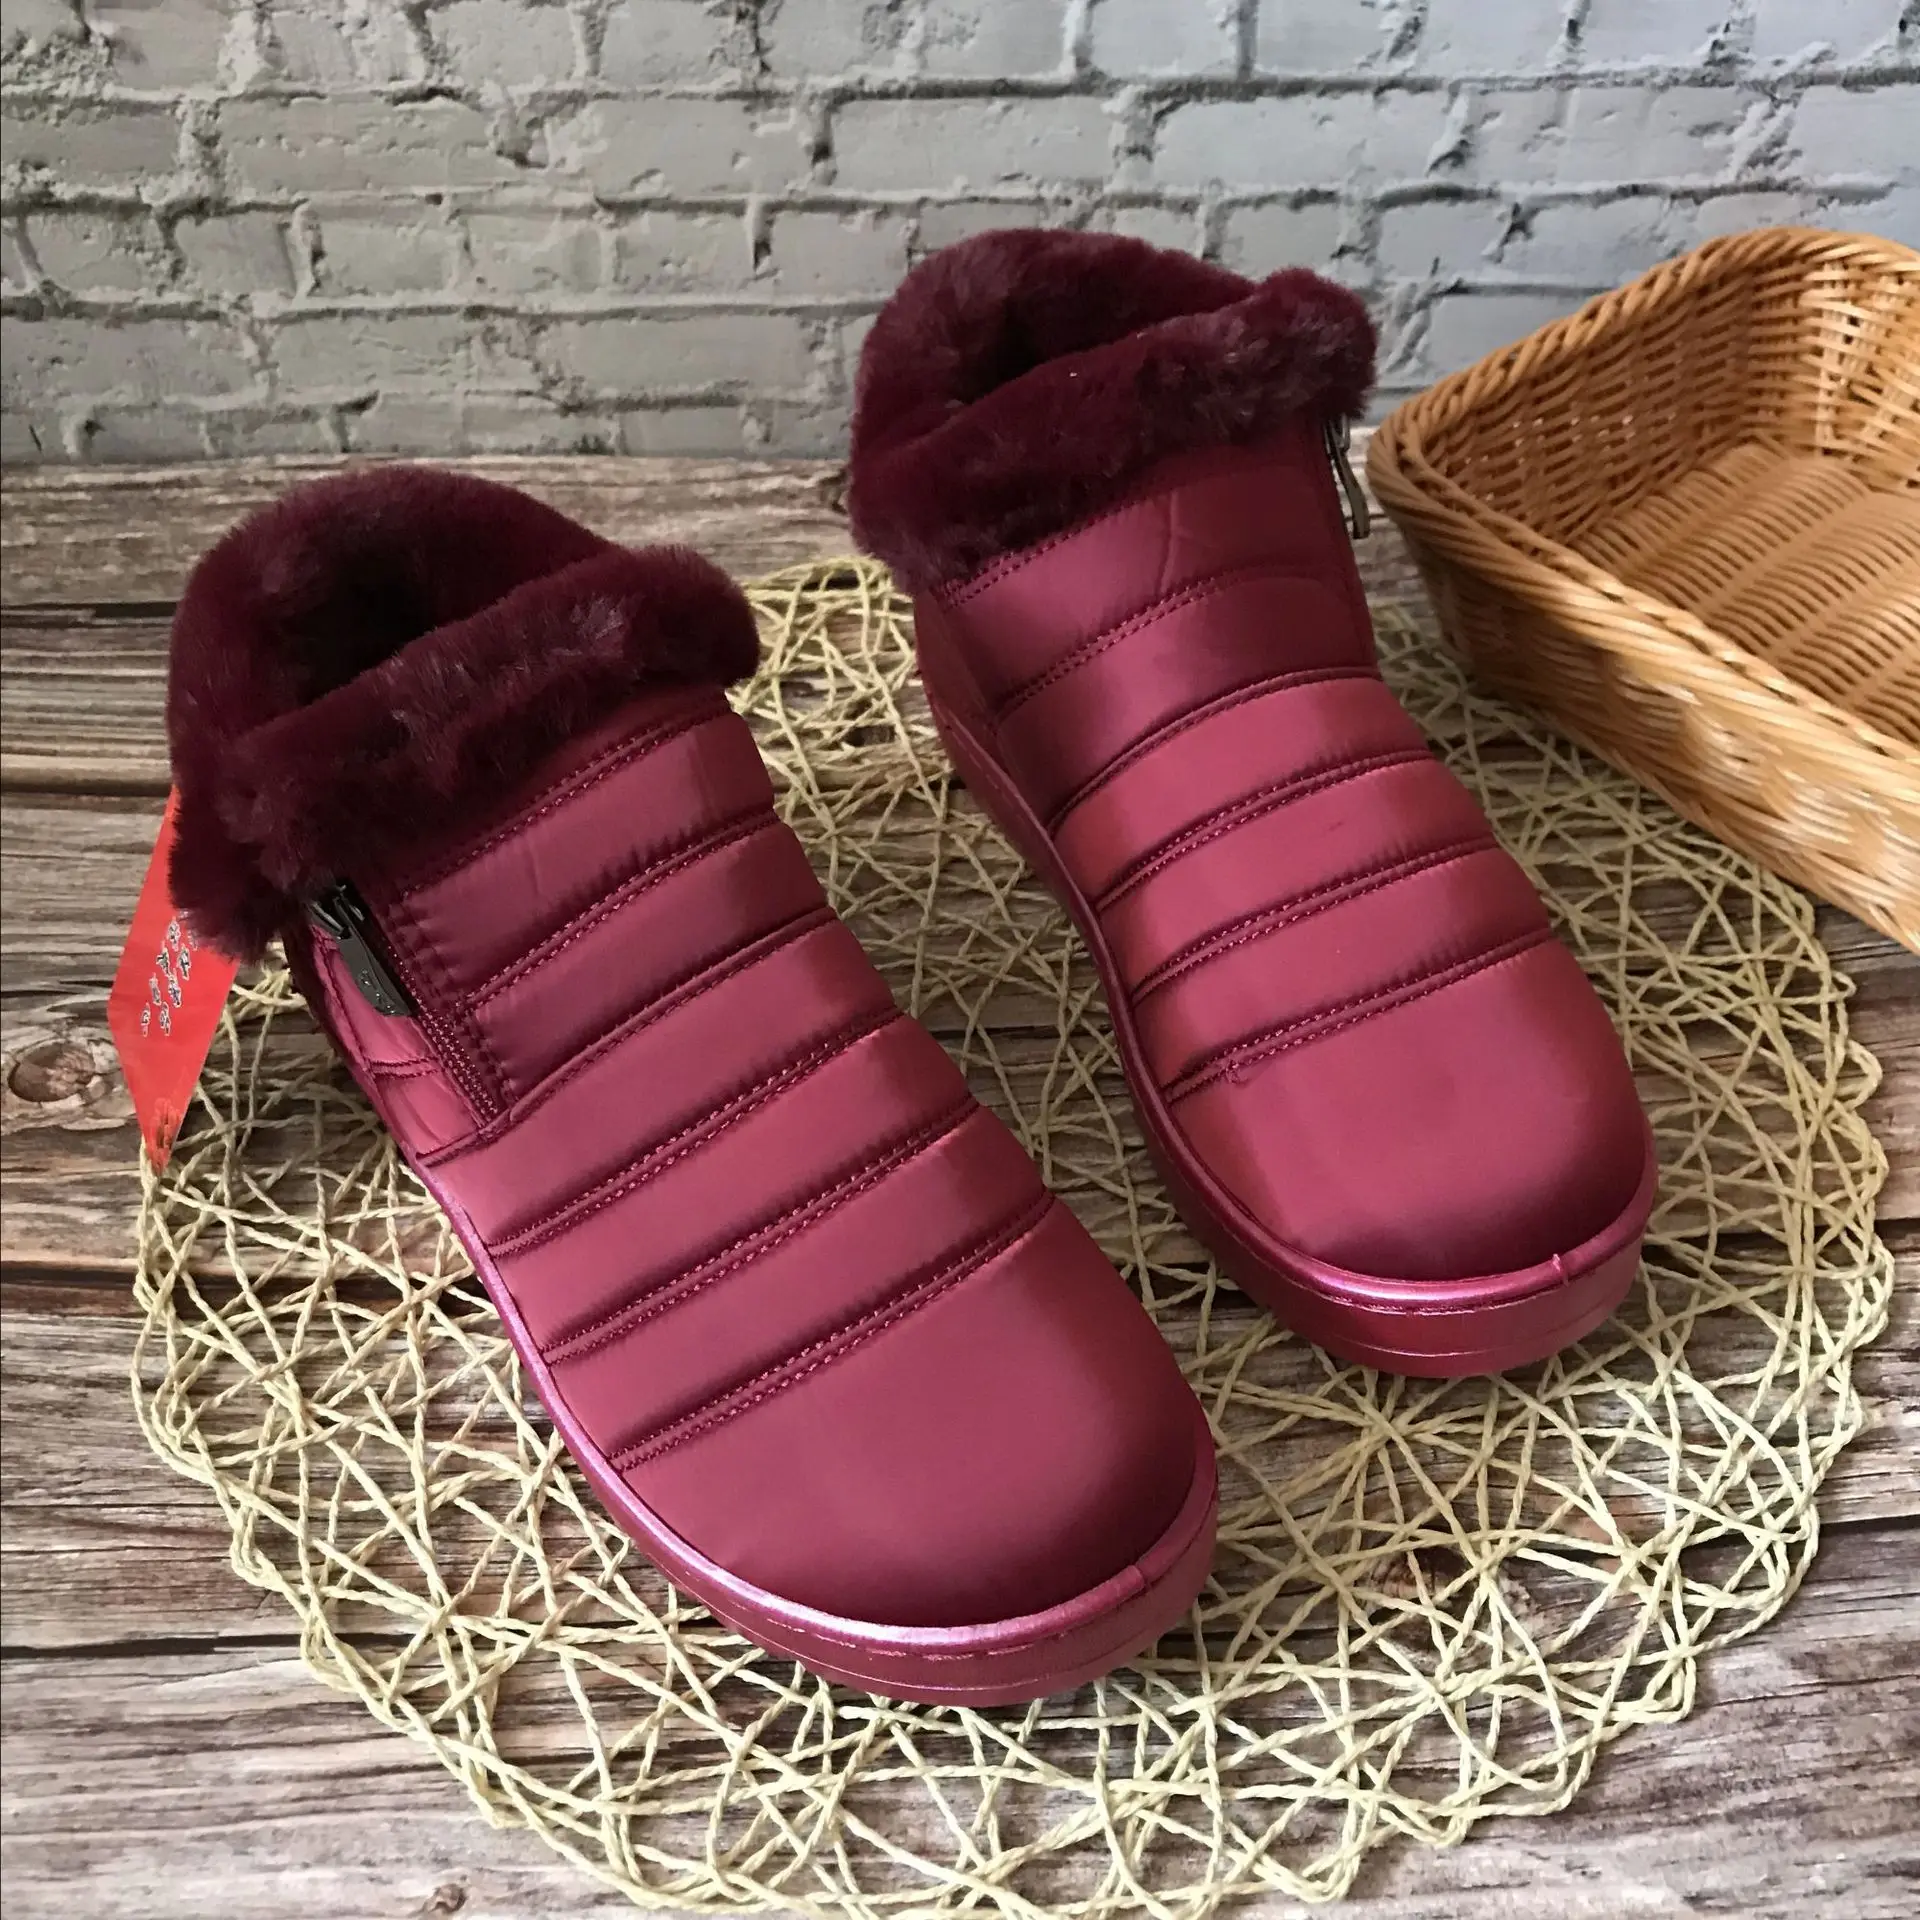 2020 New Women's Comfortable Boots Women's High Quality Woman Fashion Women's Shoes Round Toe Boots